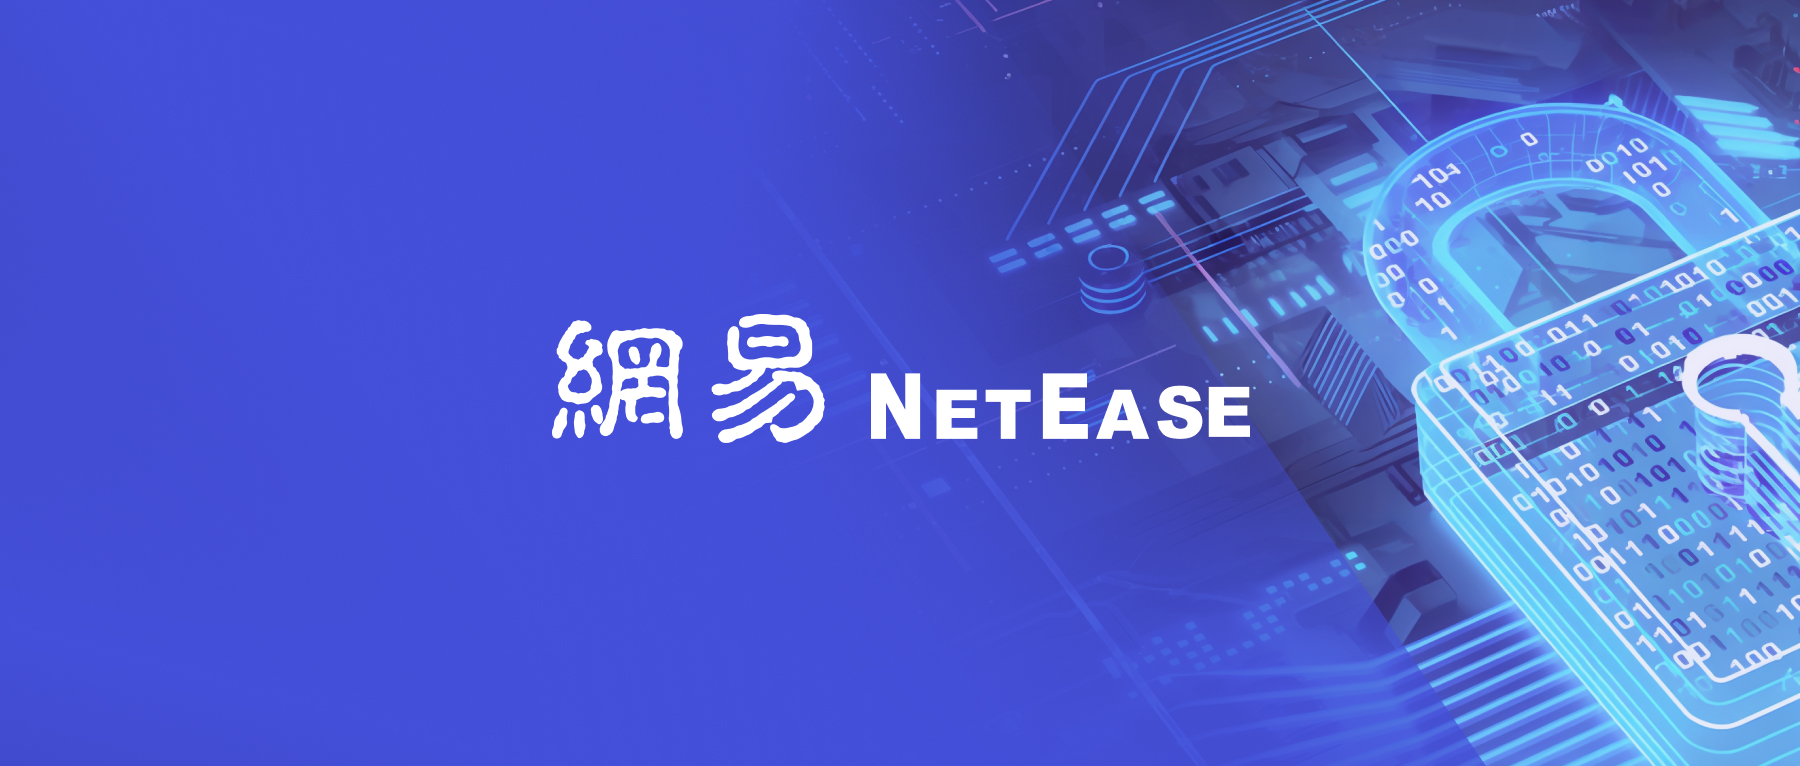 Apache Doris for log and time series data analysis in NetEase, why not Elasticsearch and InfluxDB?